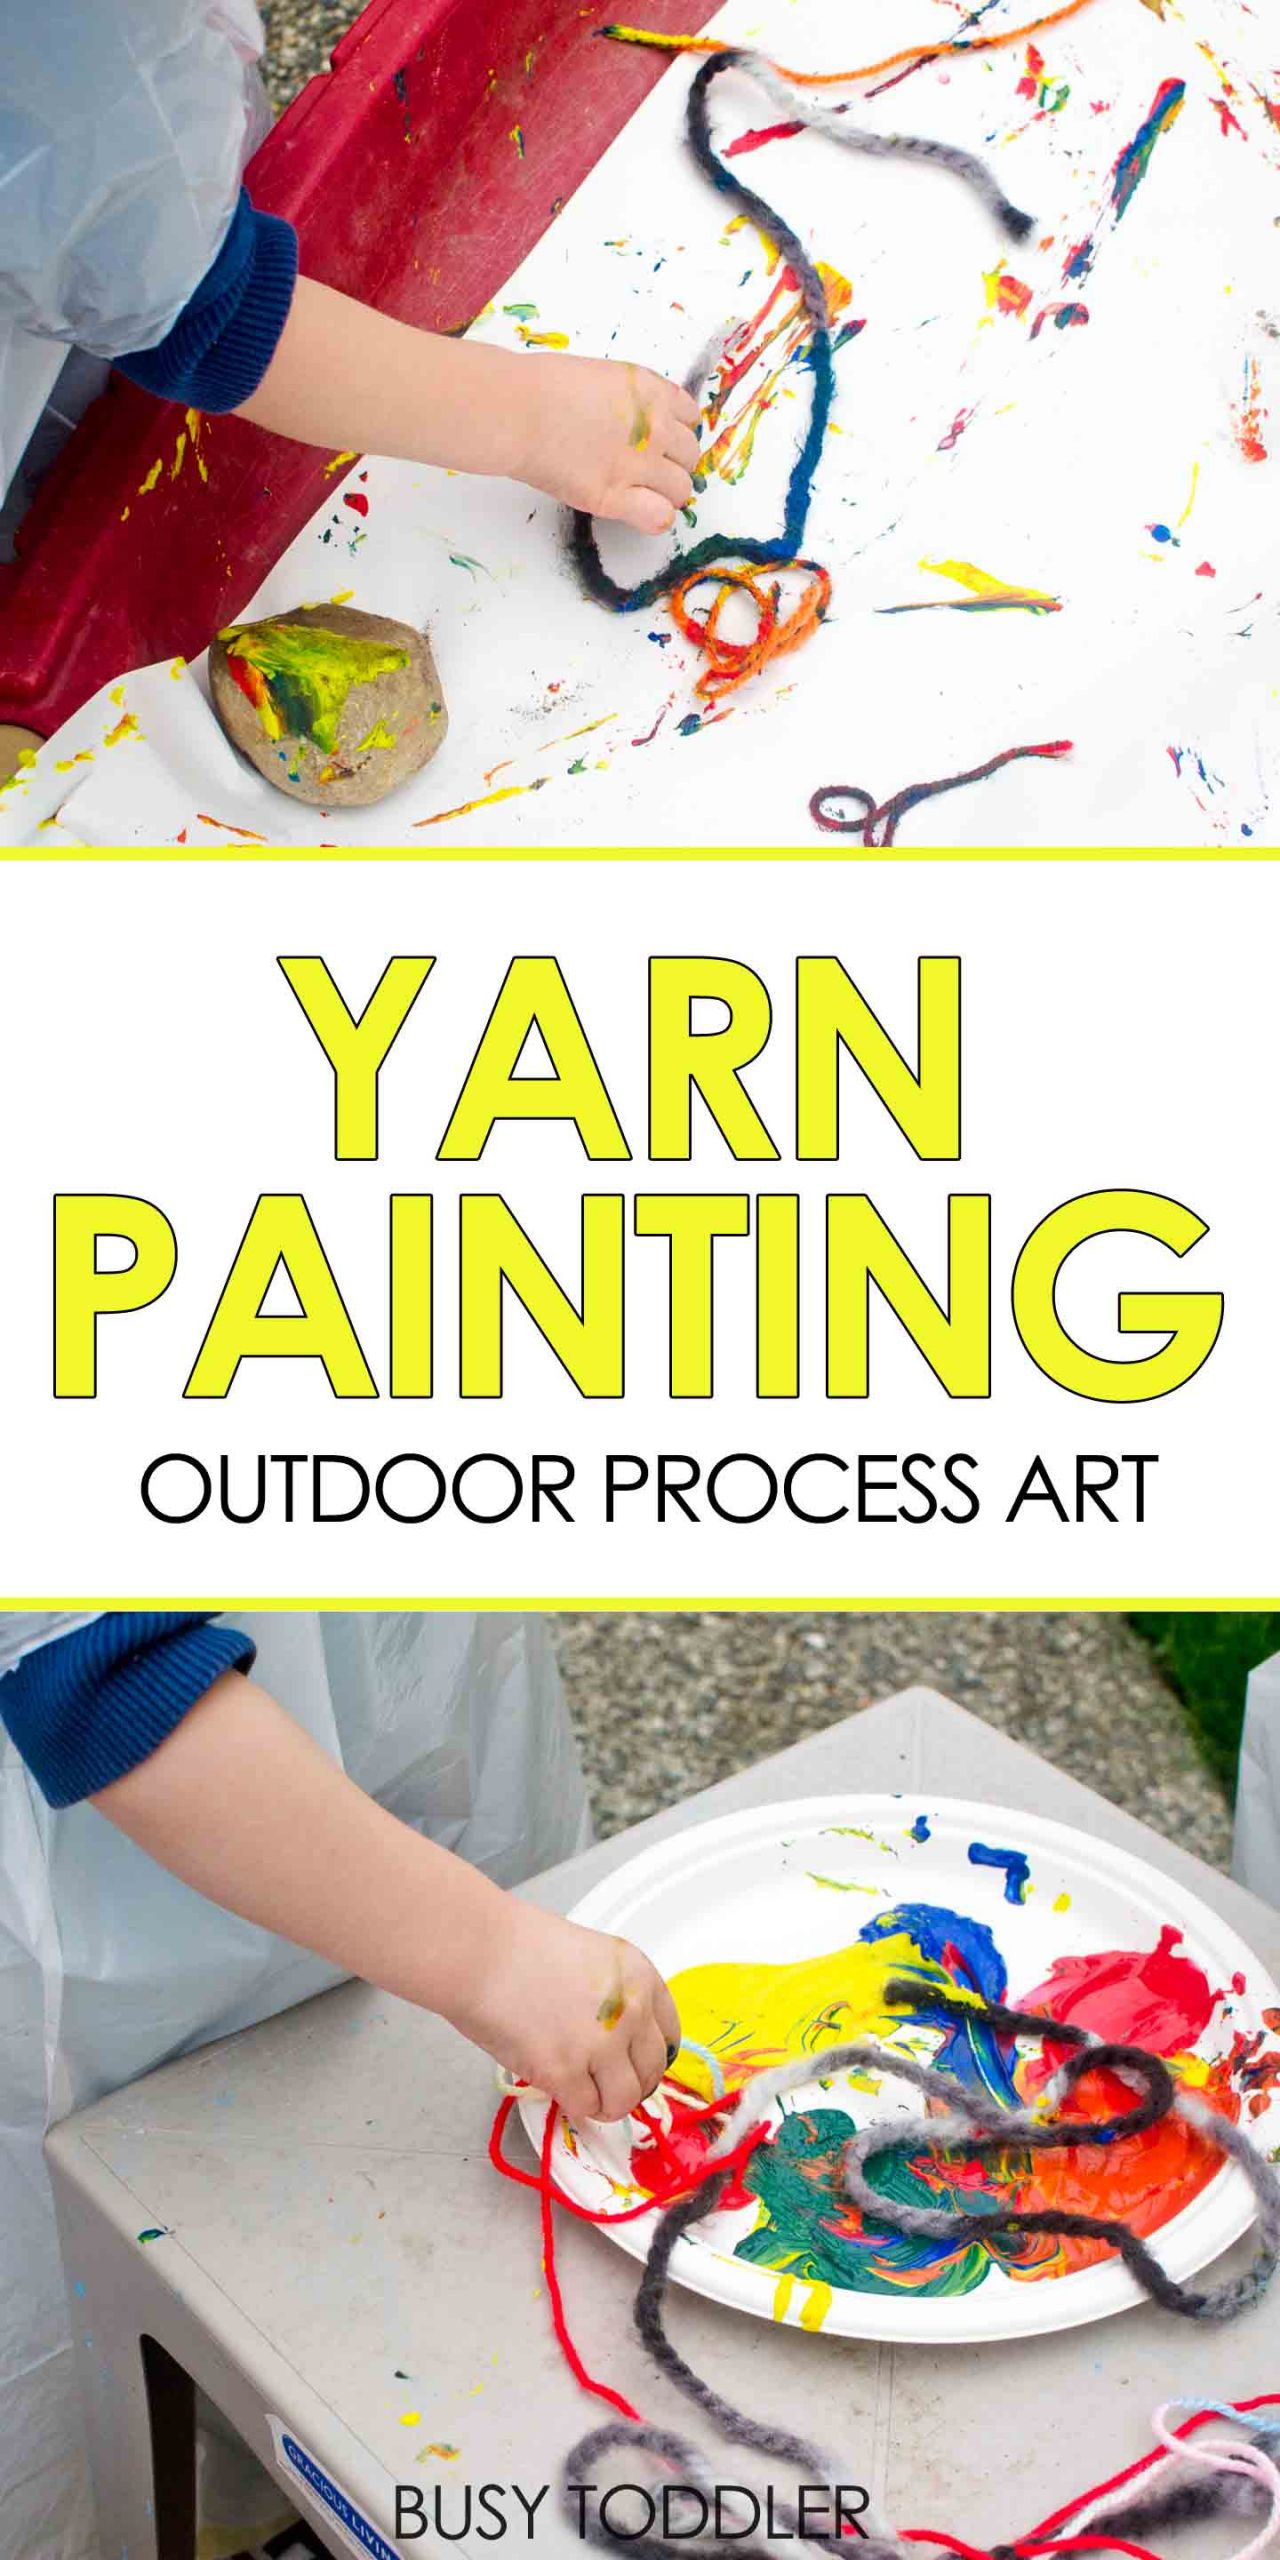 Spring Art Activities For Toddlers
 Yarn Painting Outdoor Process Art Busy Toddler